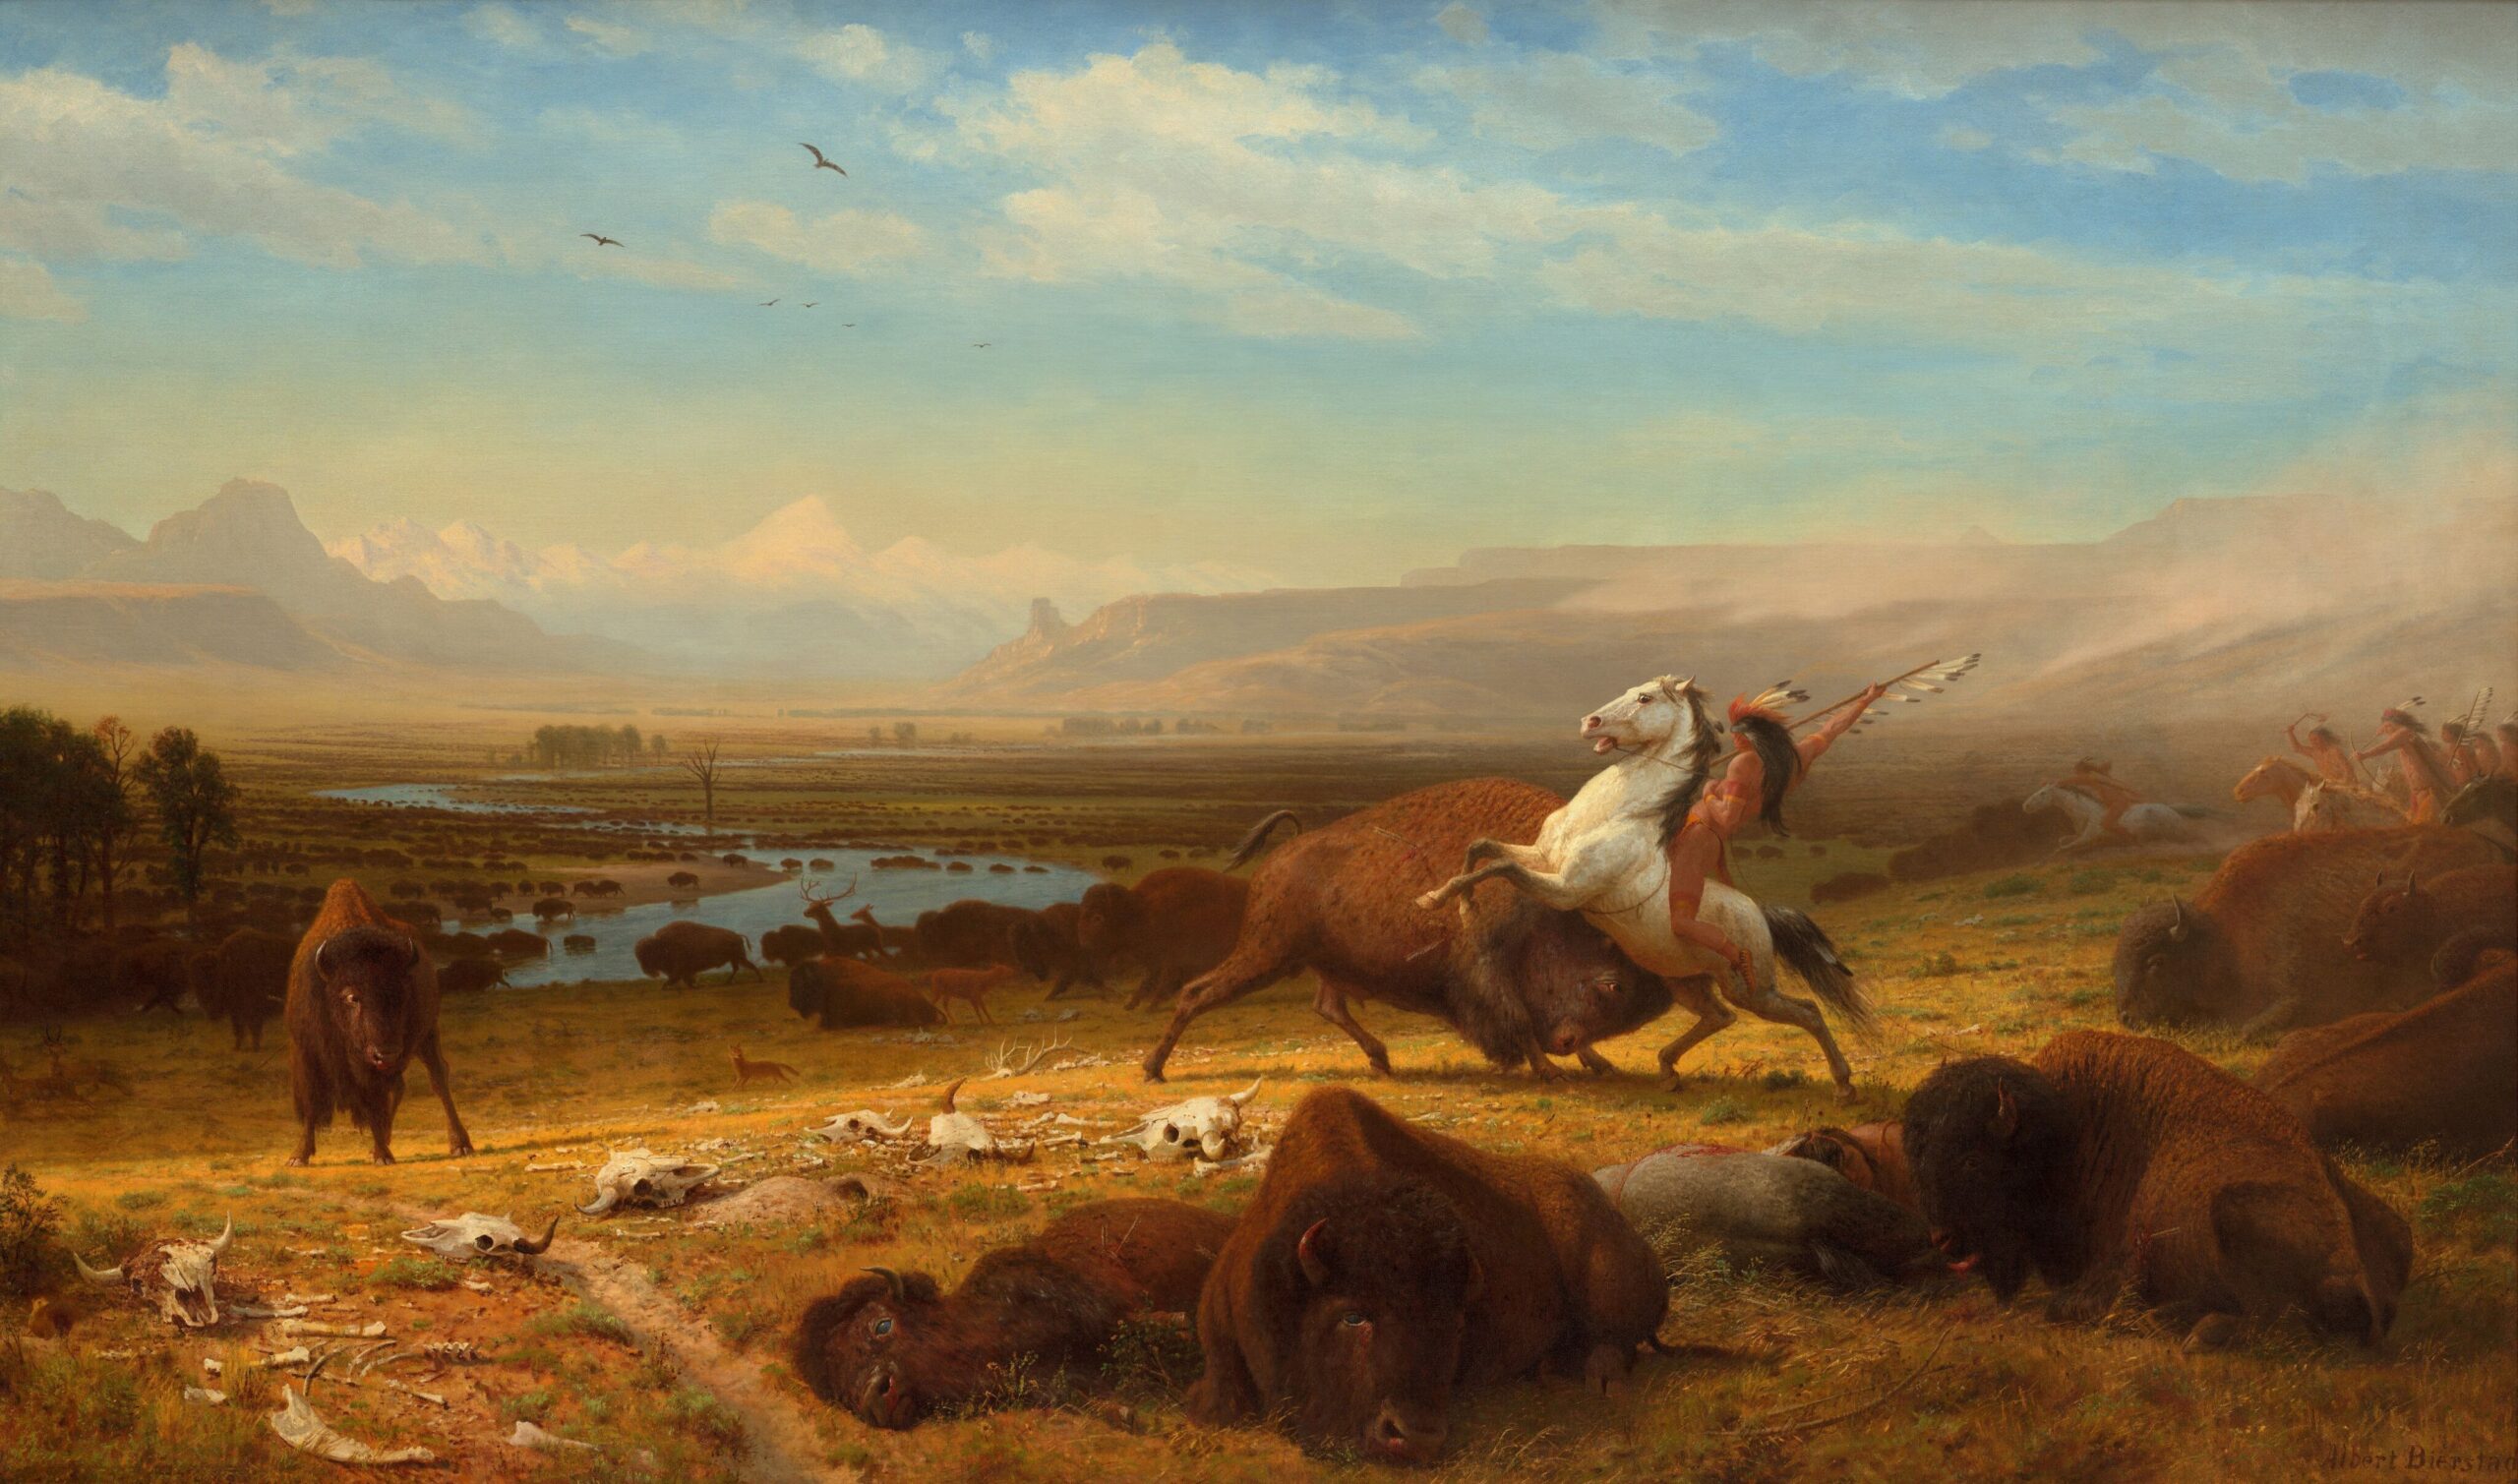 A painting of an Indian riding a white horse and hunting buffalo with a spear